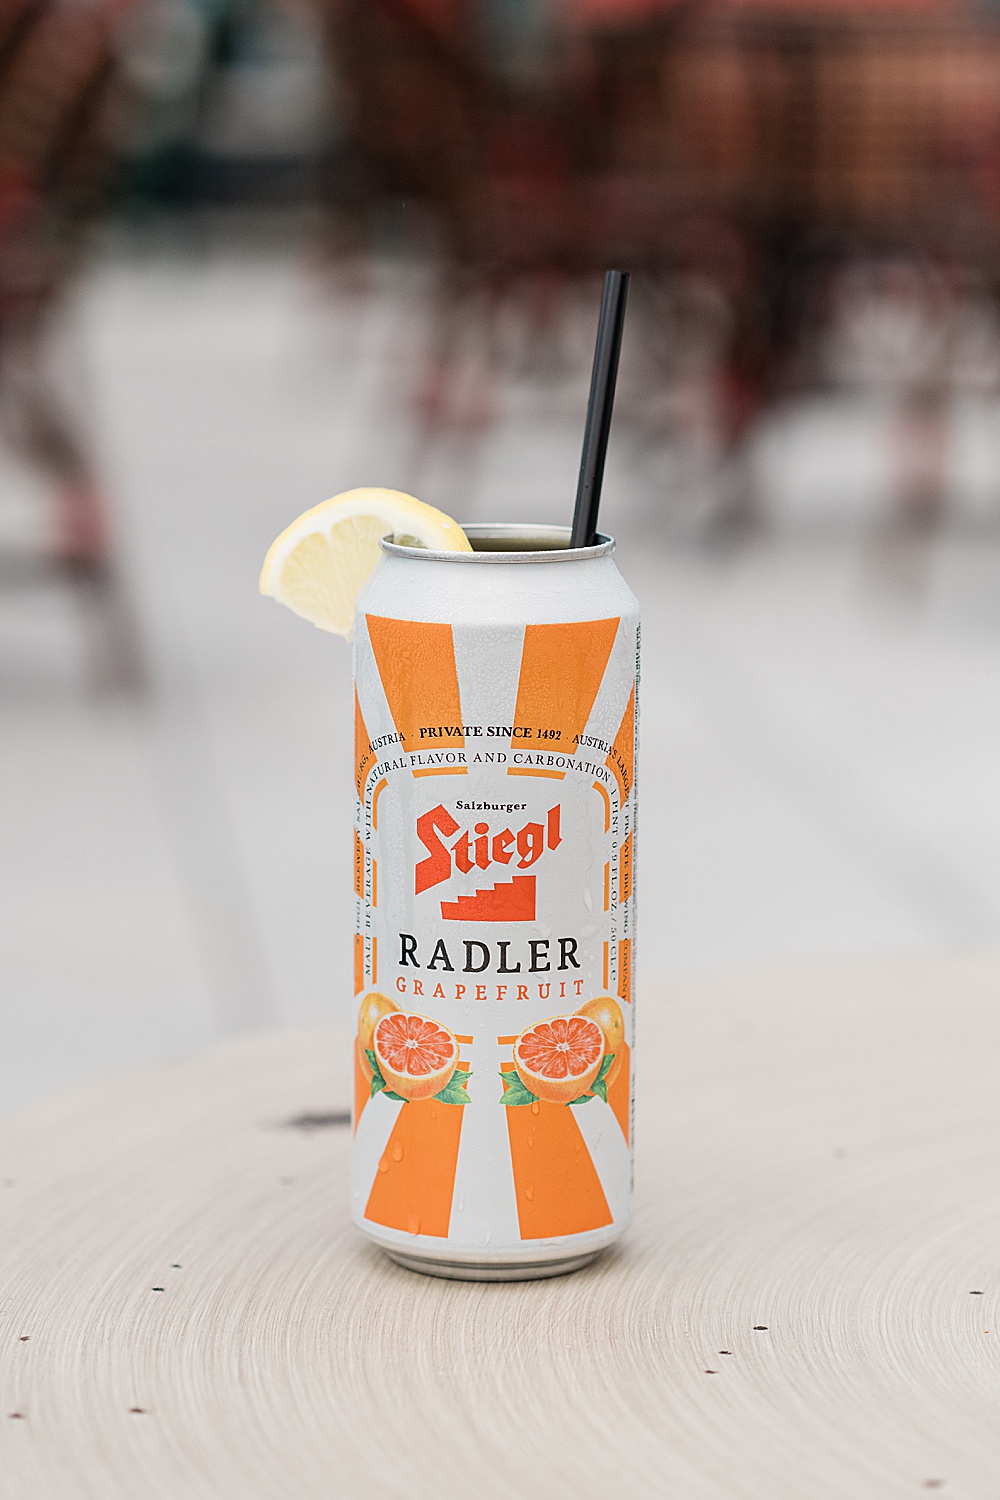 Graduate Rock bar commercial photography showing a glass with a can of Stiegl Radler Grapefruit with a lemon wedge, by Allie Siarto & Co. Photography, Lansing, Michigan commercial photographers